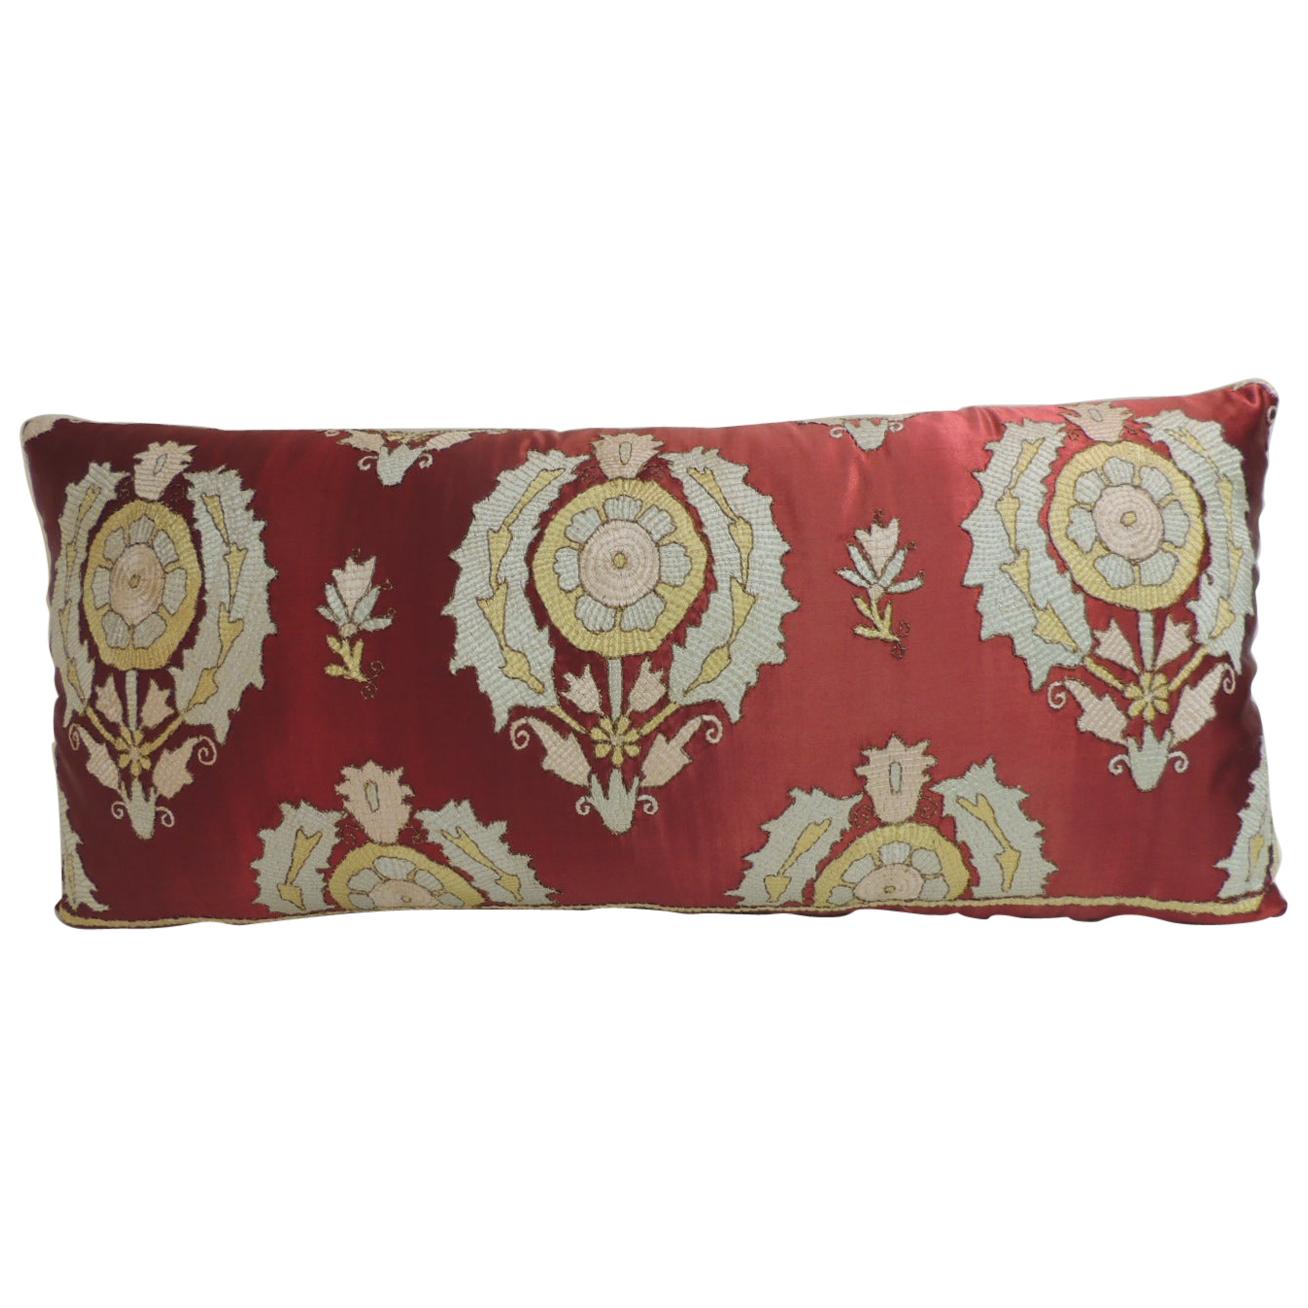 Antique Red and Green Silk Embroidered Applique Long Bolster Decorative Pillow